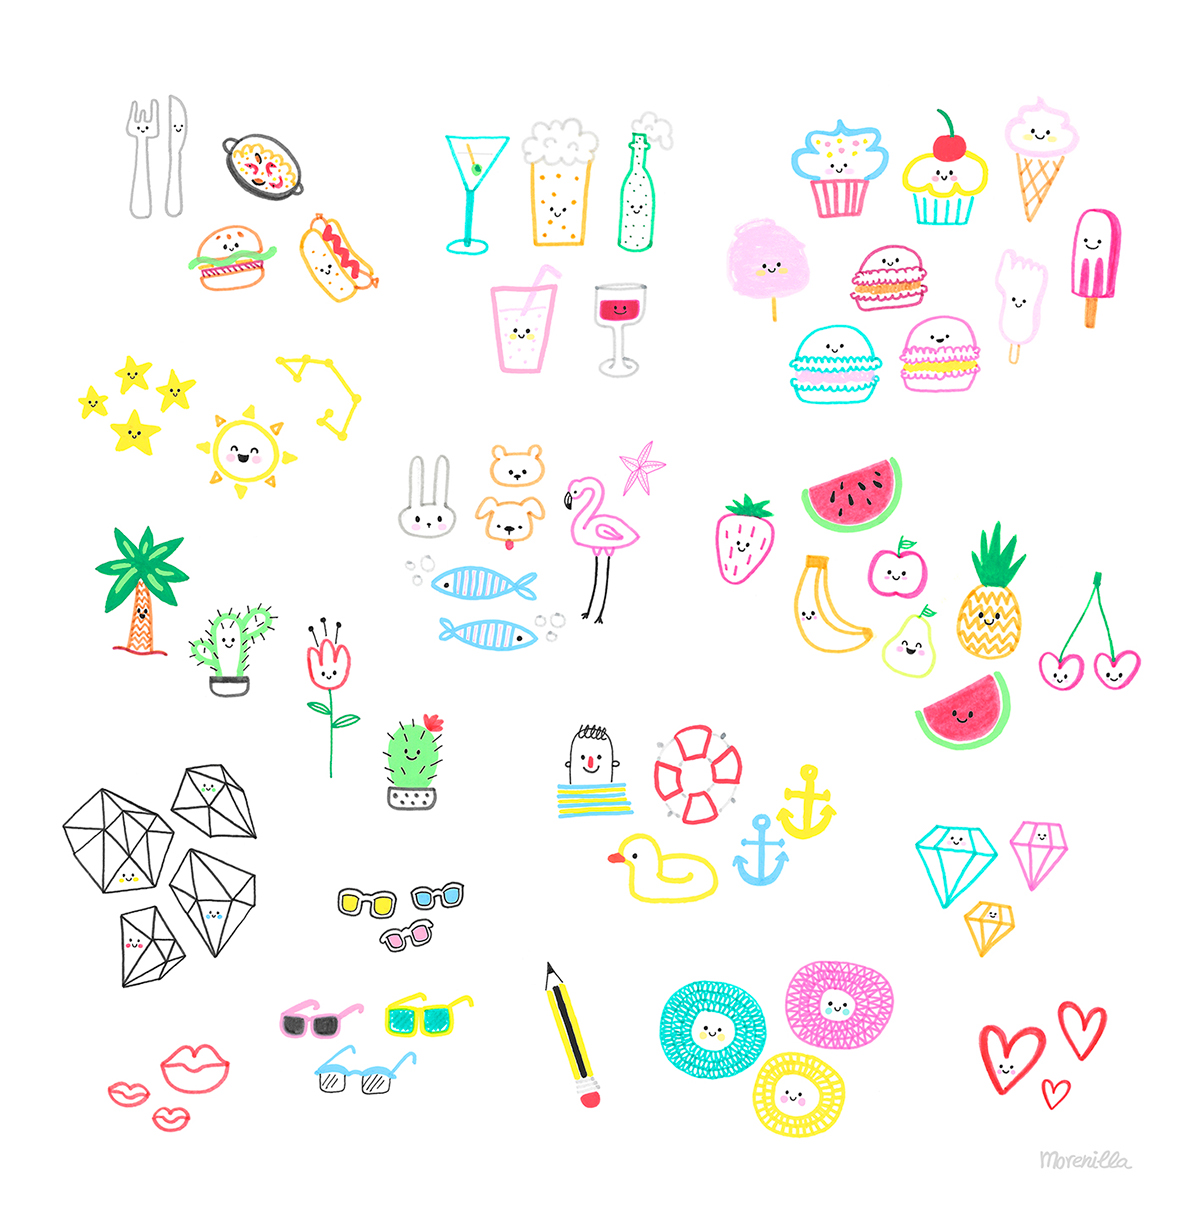 fruits drinks Food  little cute kawaii sketches doodles sea plants cactus popsicle watermelon characters anchor